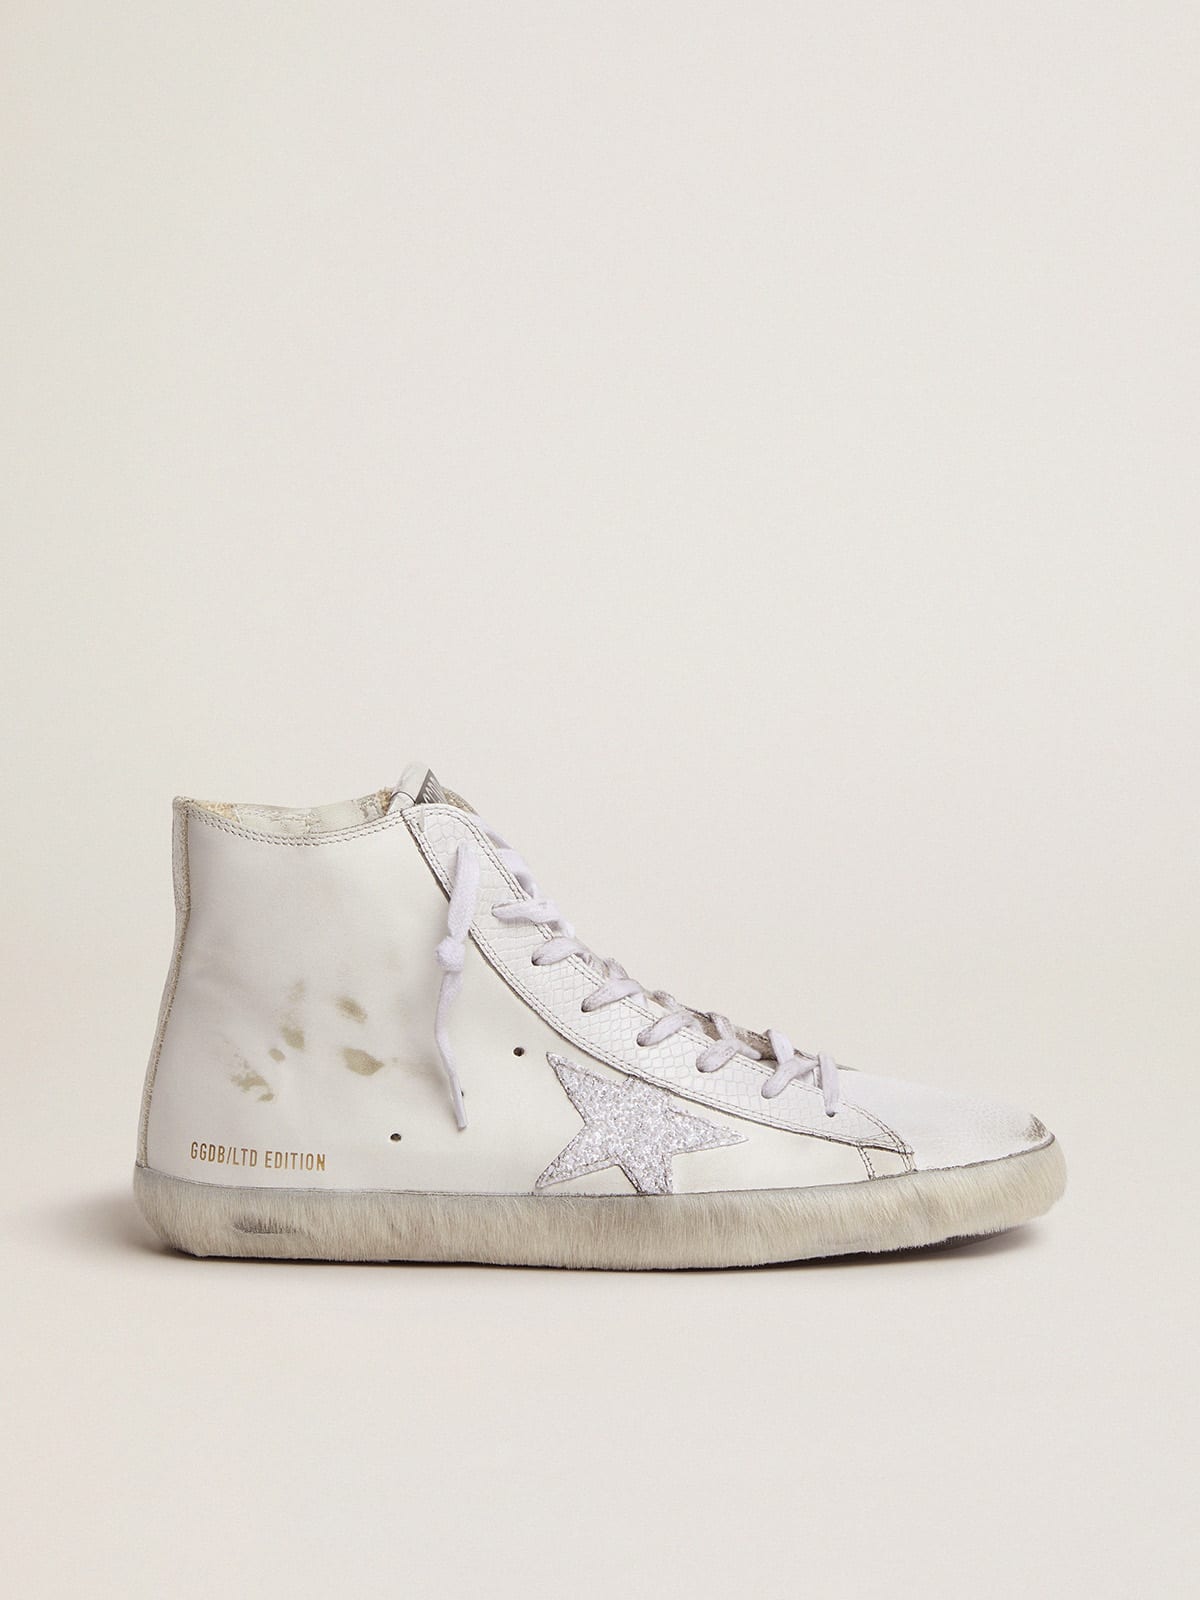 Golden Goose - Men’s LAB Limited Edition white and glitter Francy sneakers in 